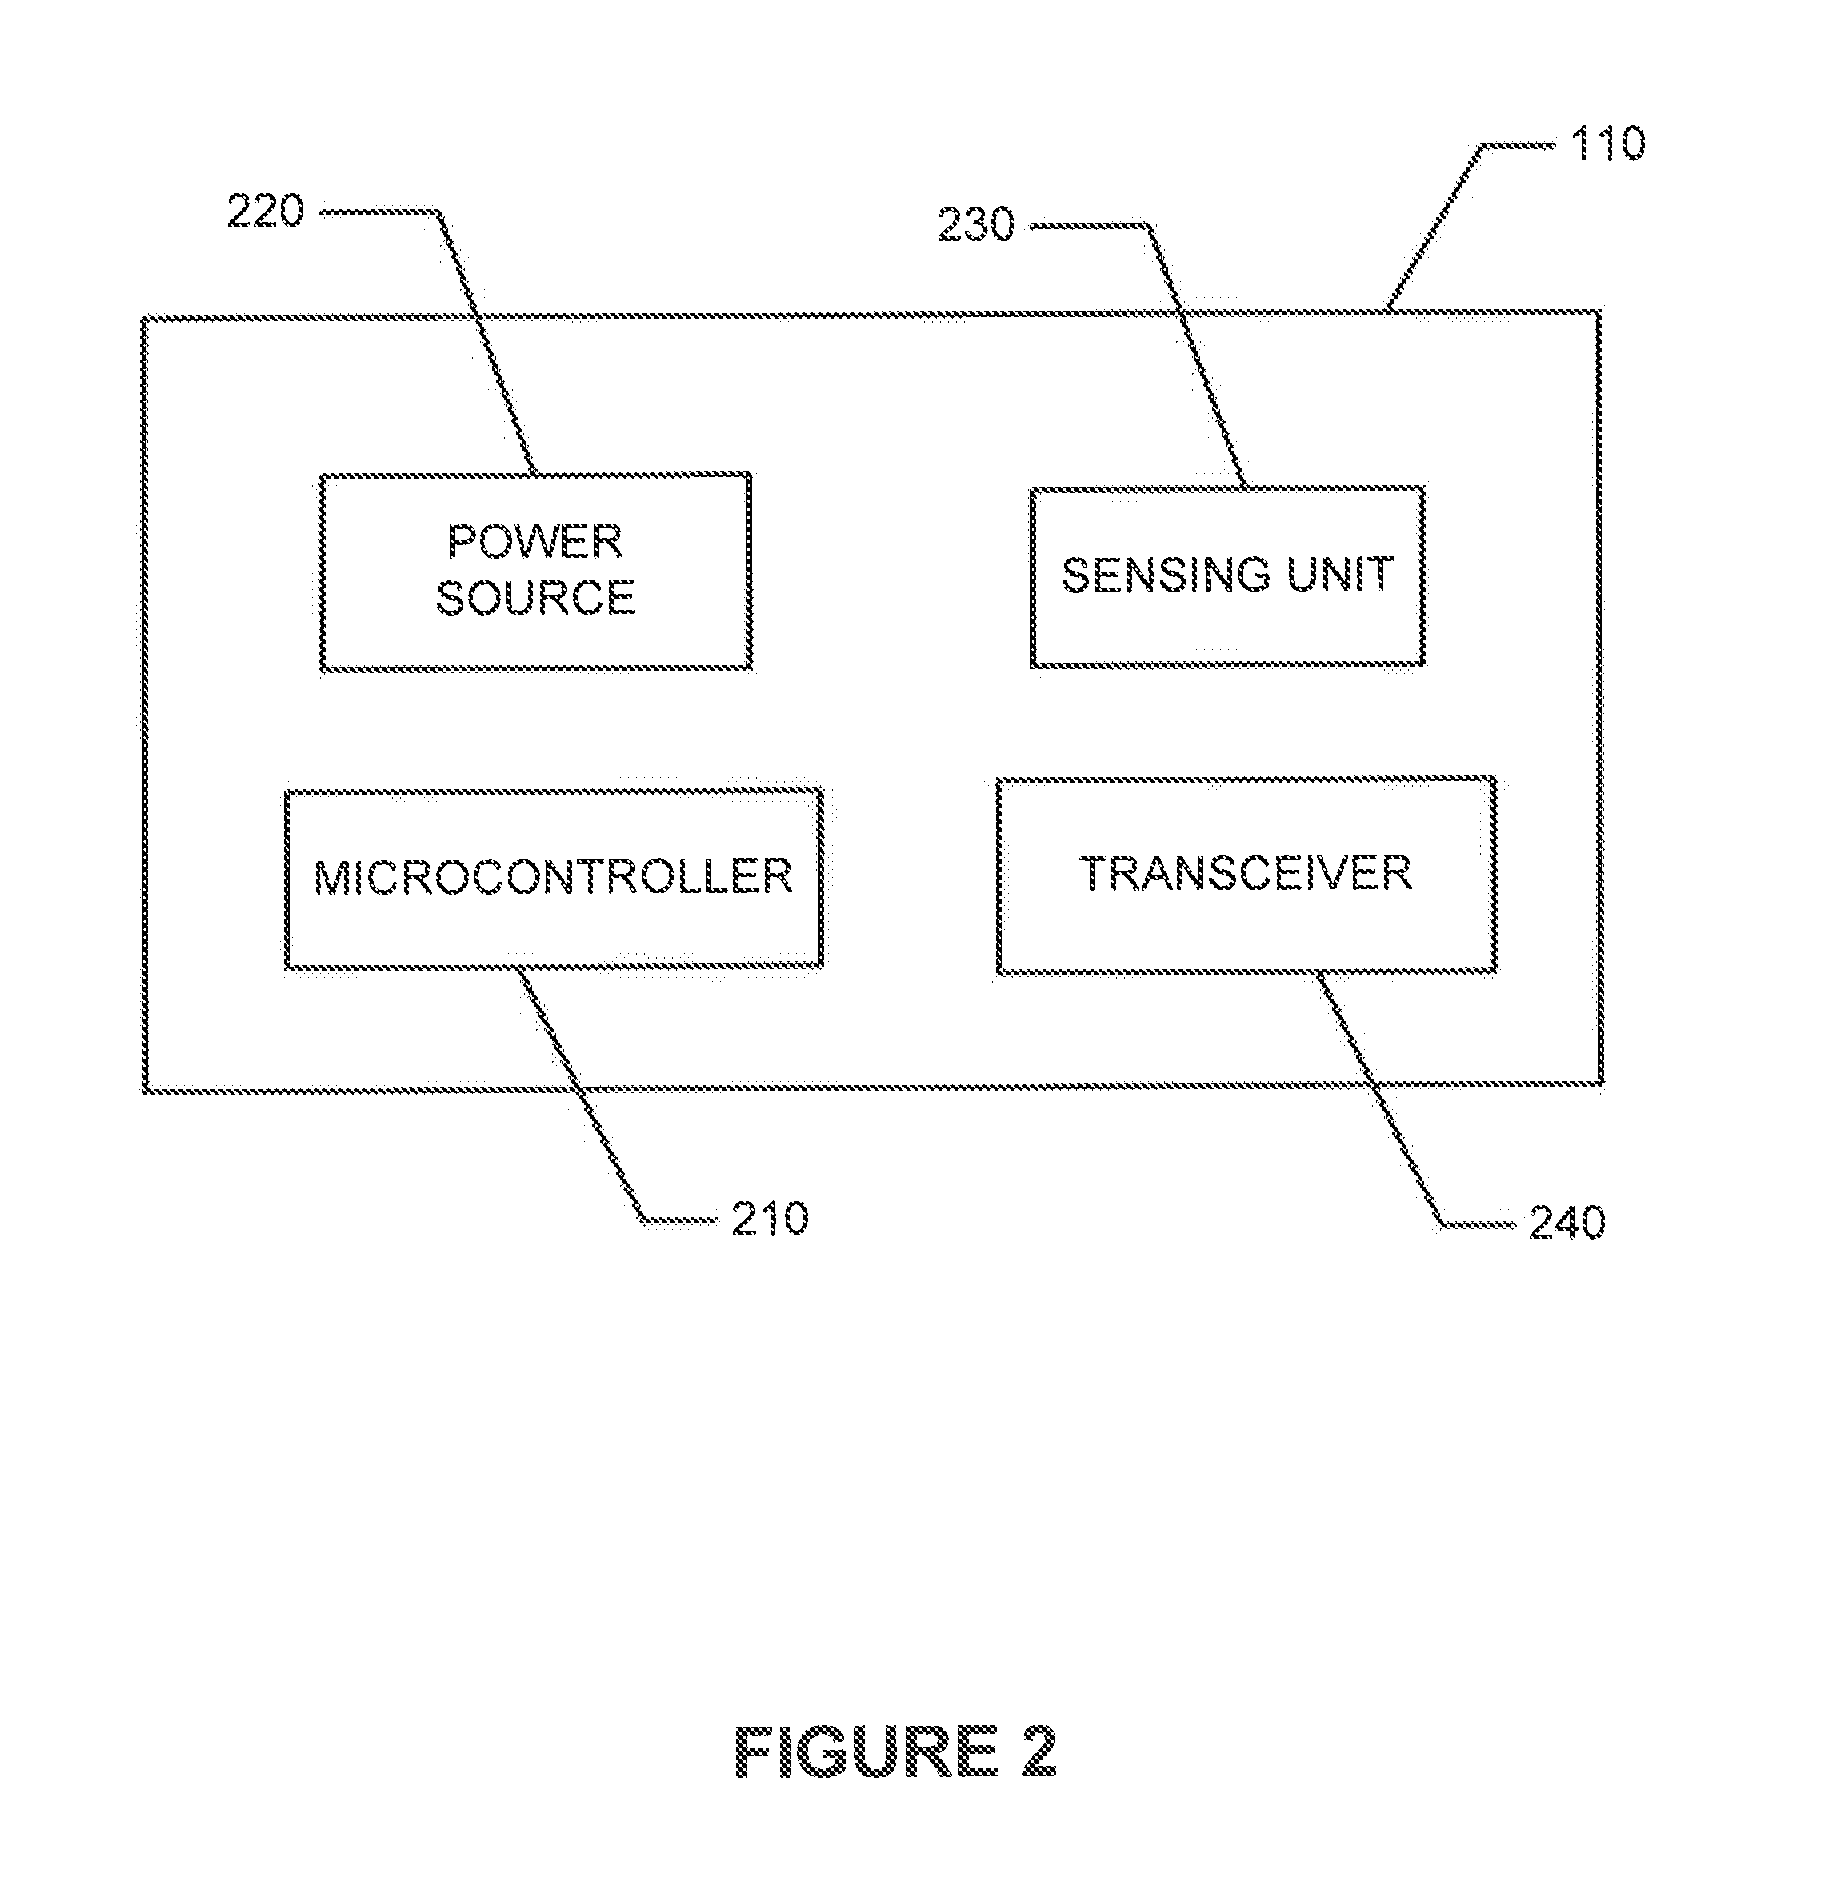 Systems and methods for portable device communications and interaction